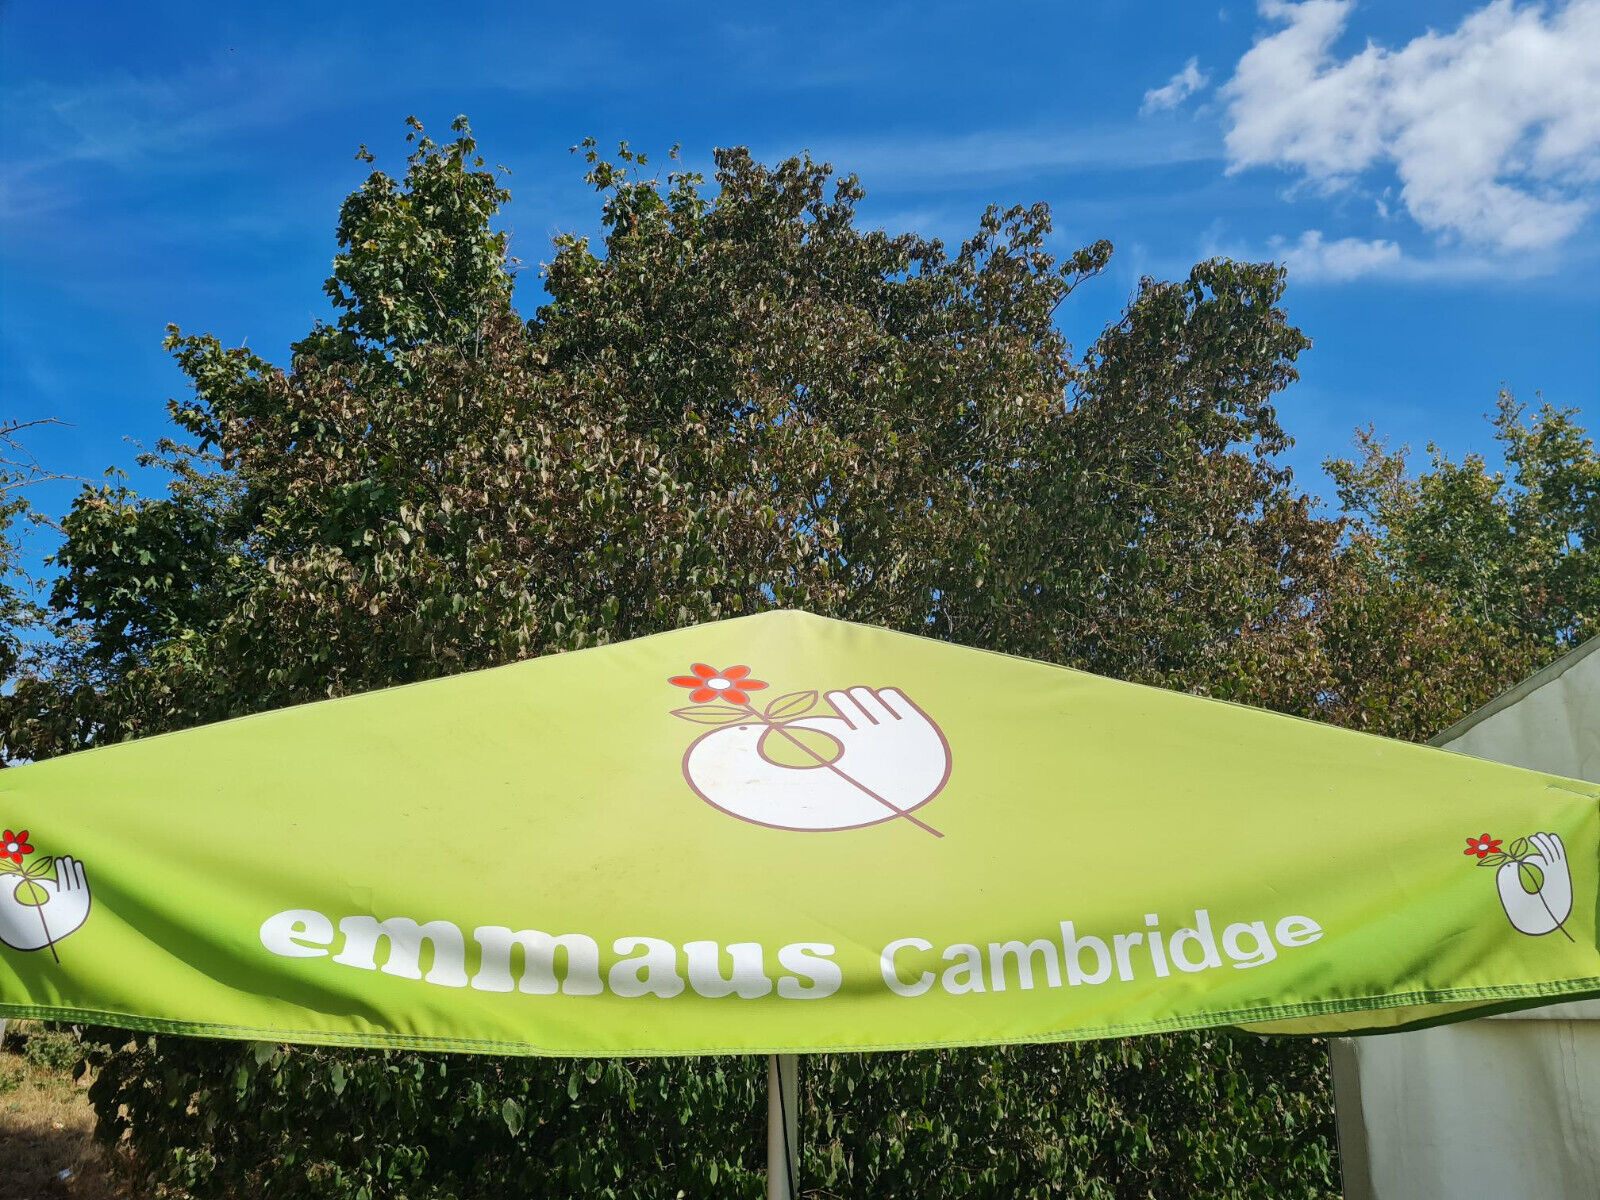 Emmaus Cambridge Charity Donation, Select Your Donation Amount From £1